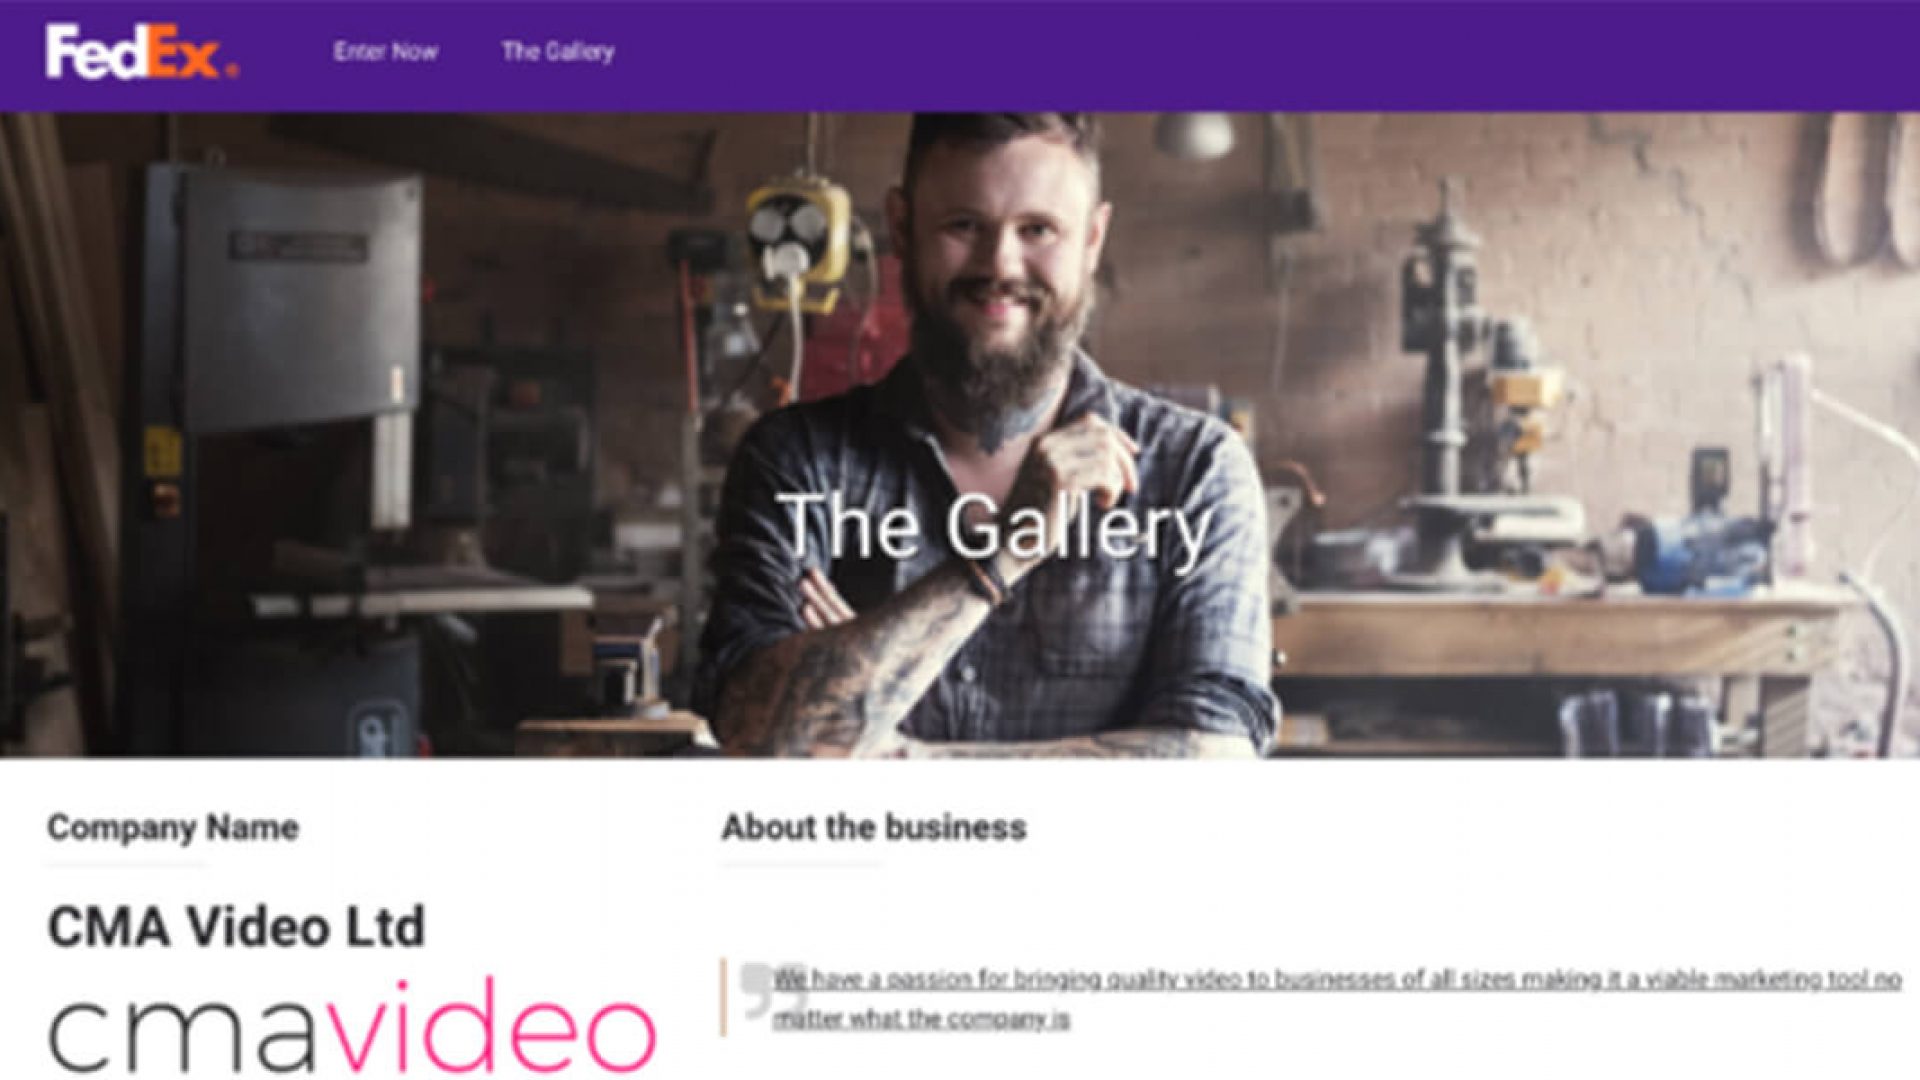 FedEx Small Business Grant Shortlisting For CMA Video